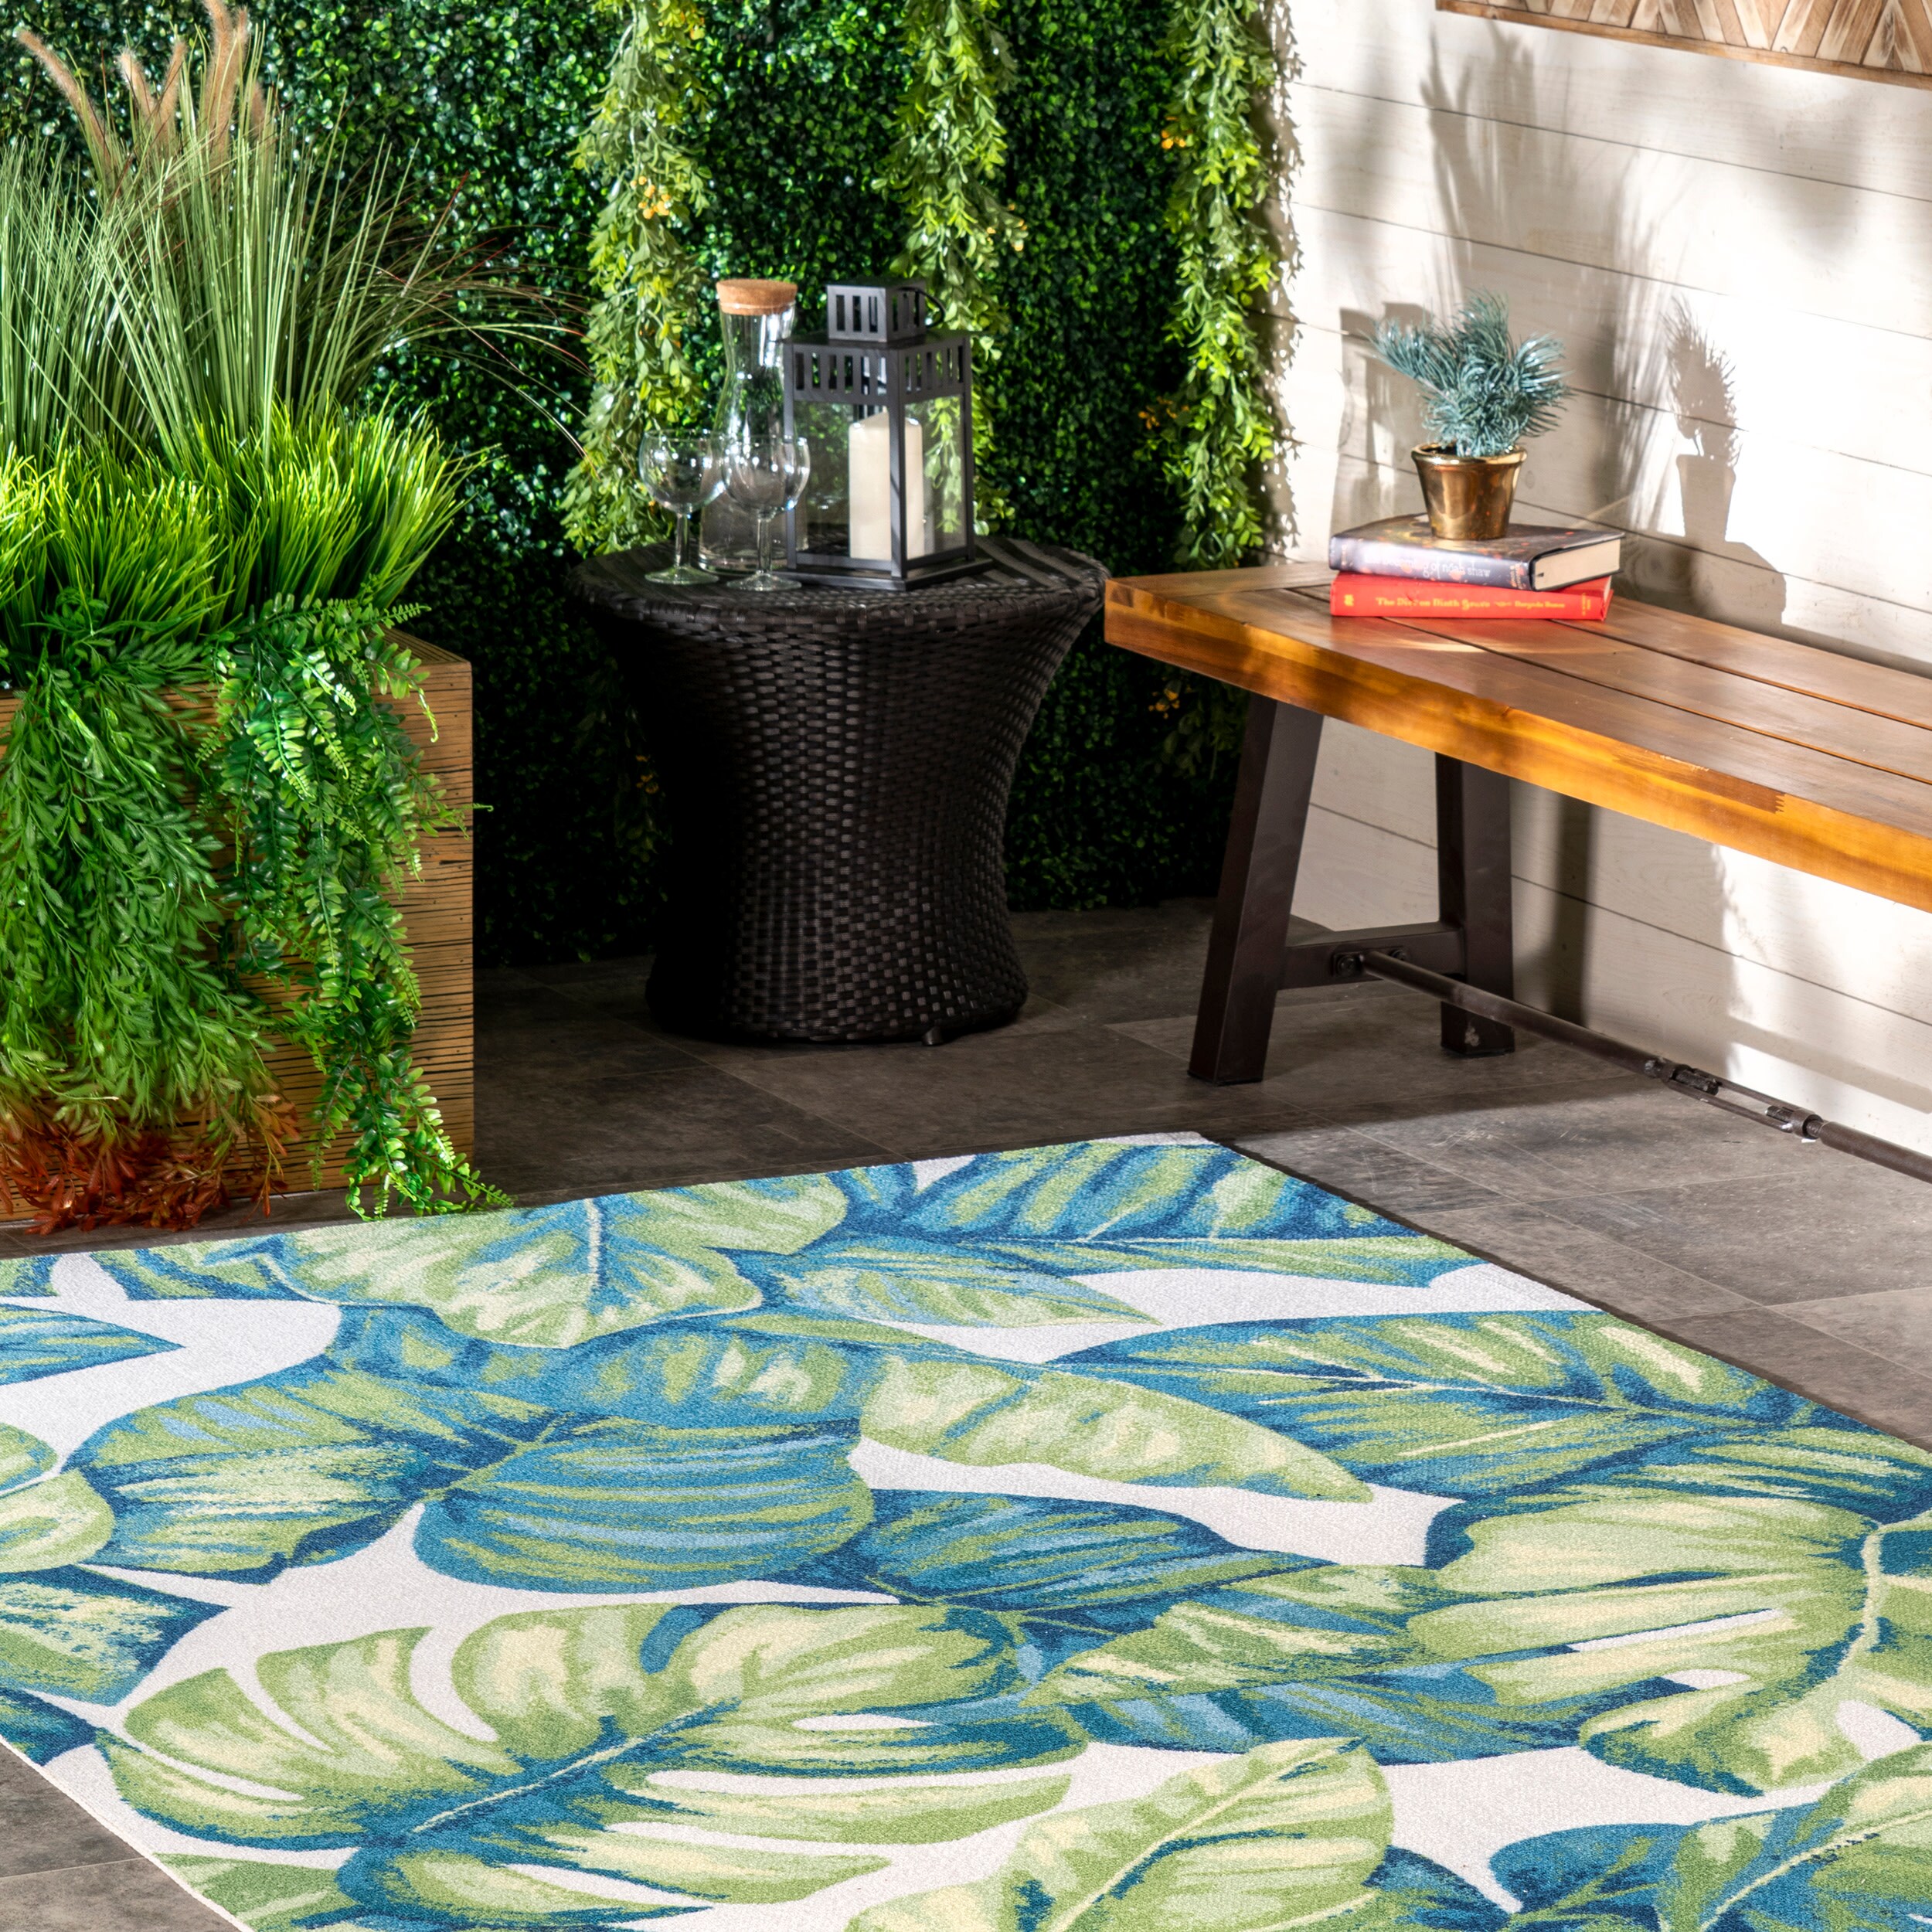 nuLOOM Oasis 2 x 3 Indoor/Outdoor Floral/Botanical Area Rug in the